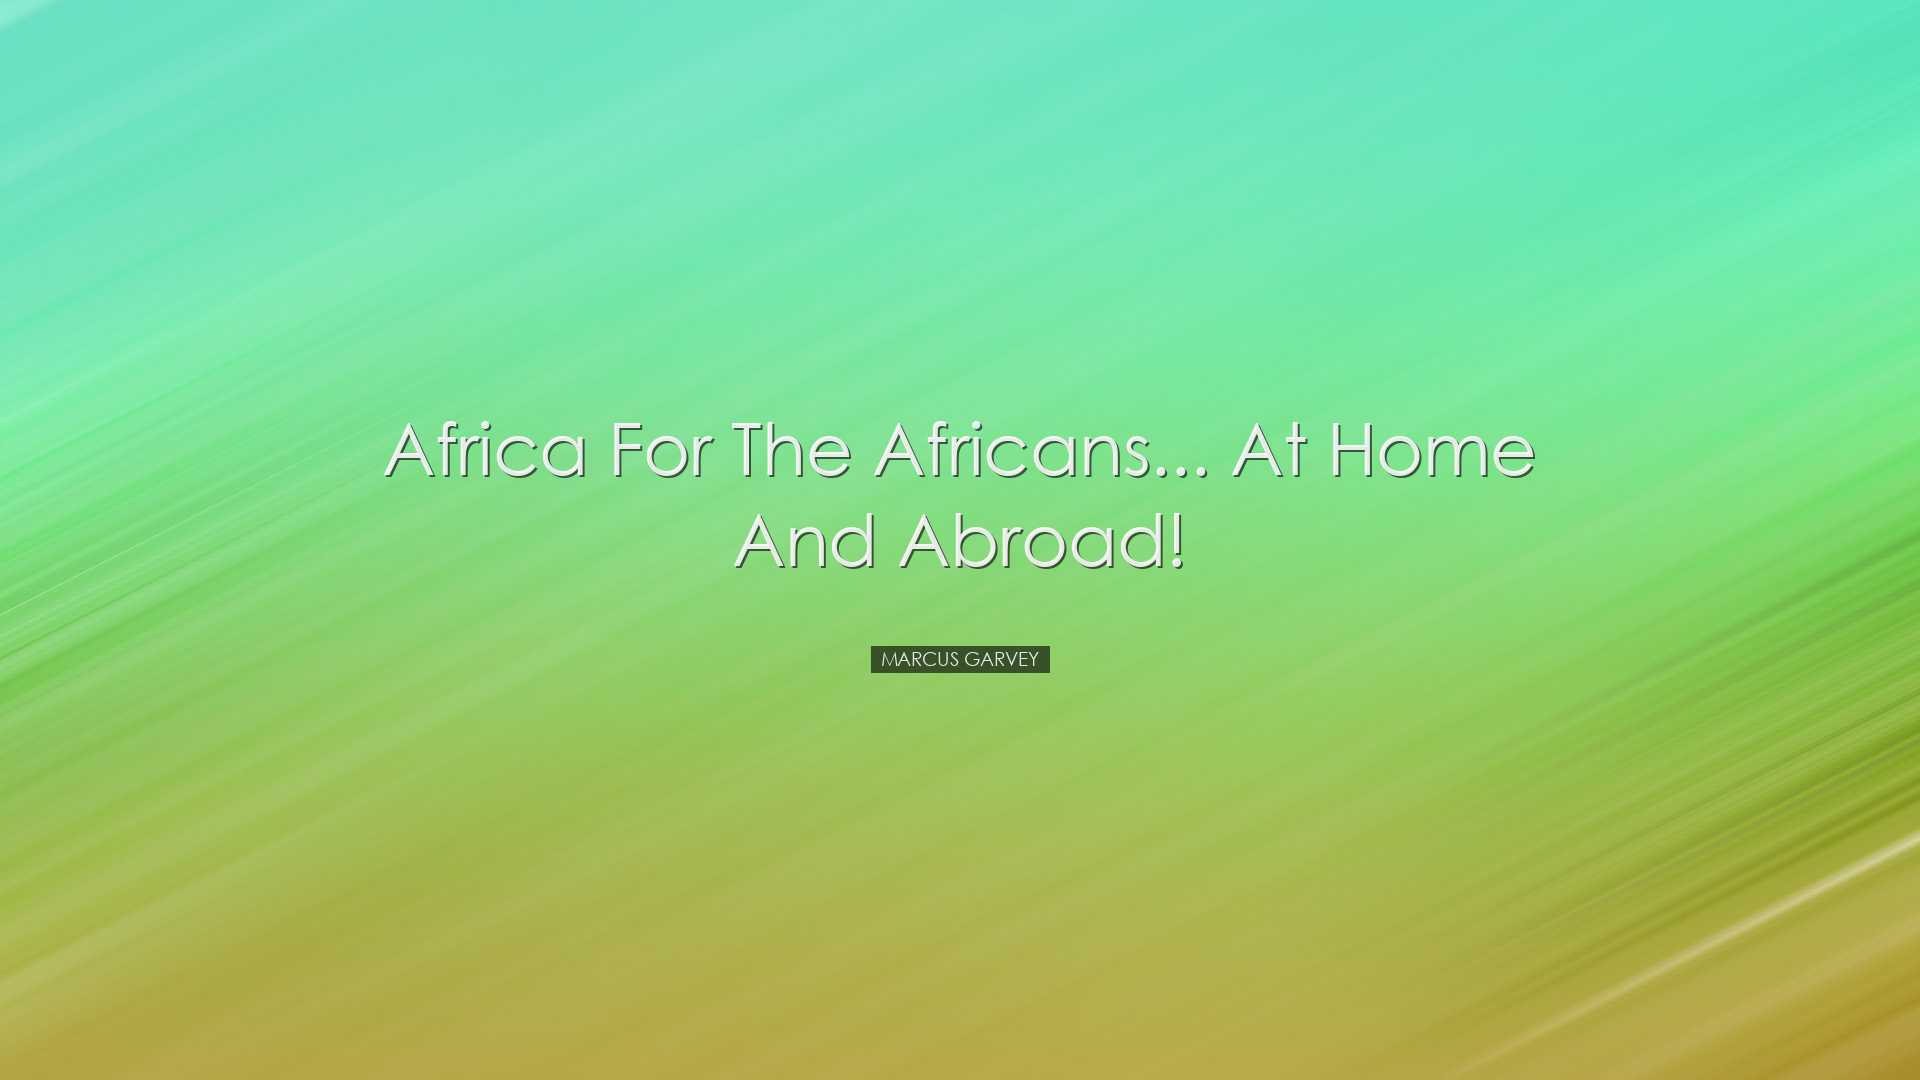 Africa for the Africans... at home and abroad! - Marcus Garvey